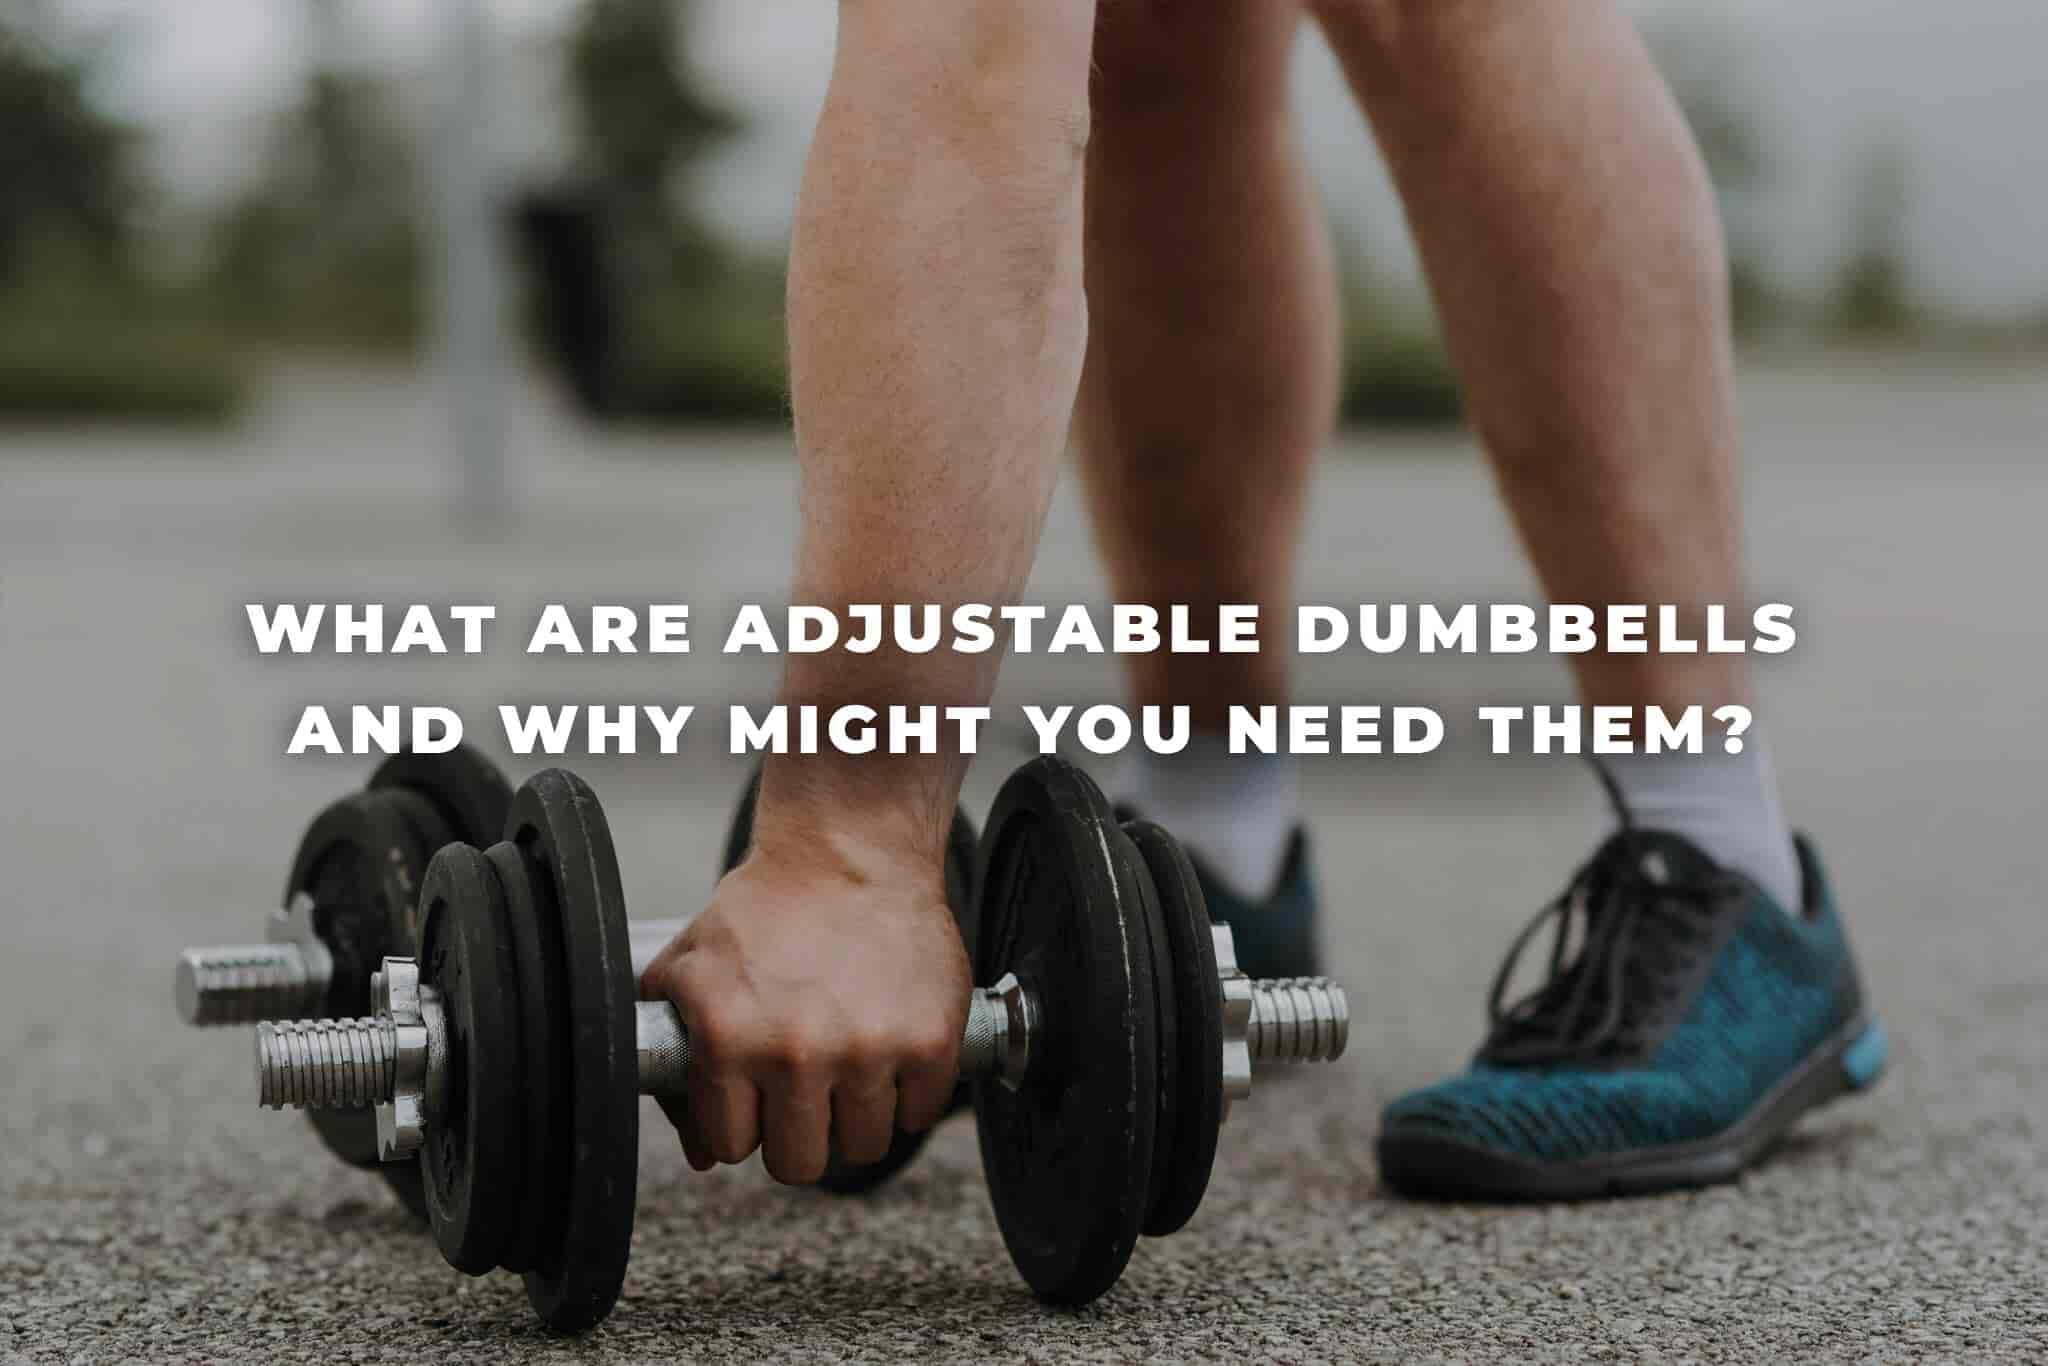 What are adjustable dumbbells and why might you need them?